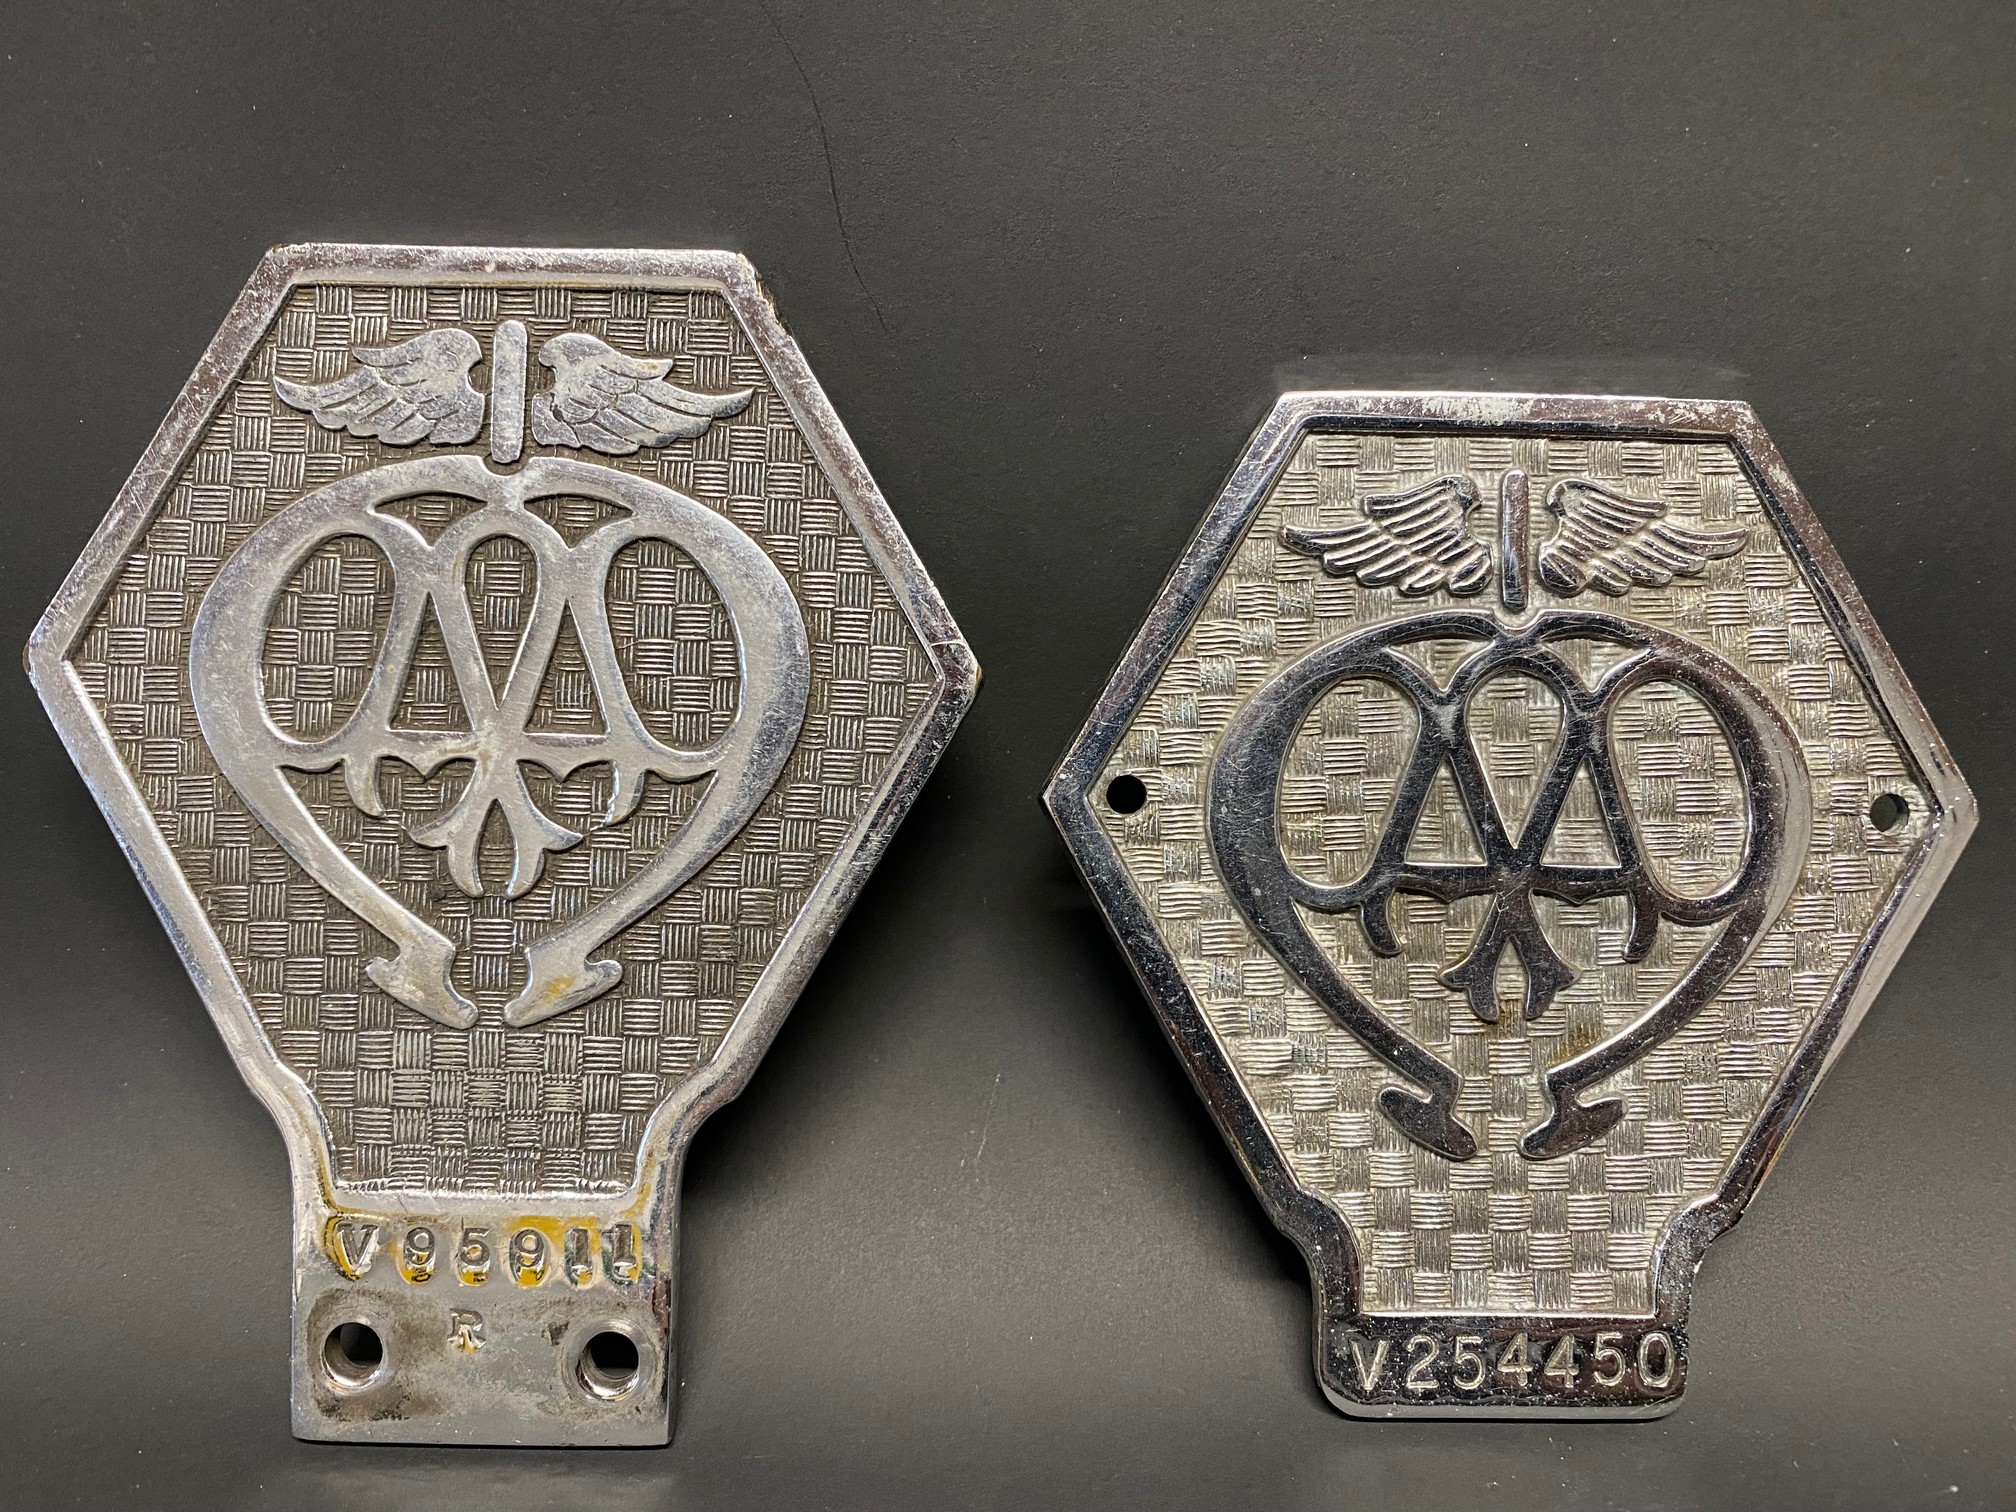 Two AA Commercial badges, V95911 and V254450.